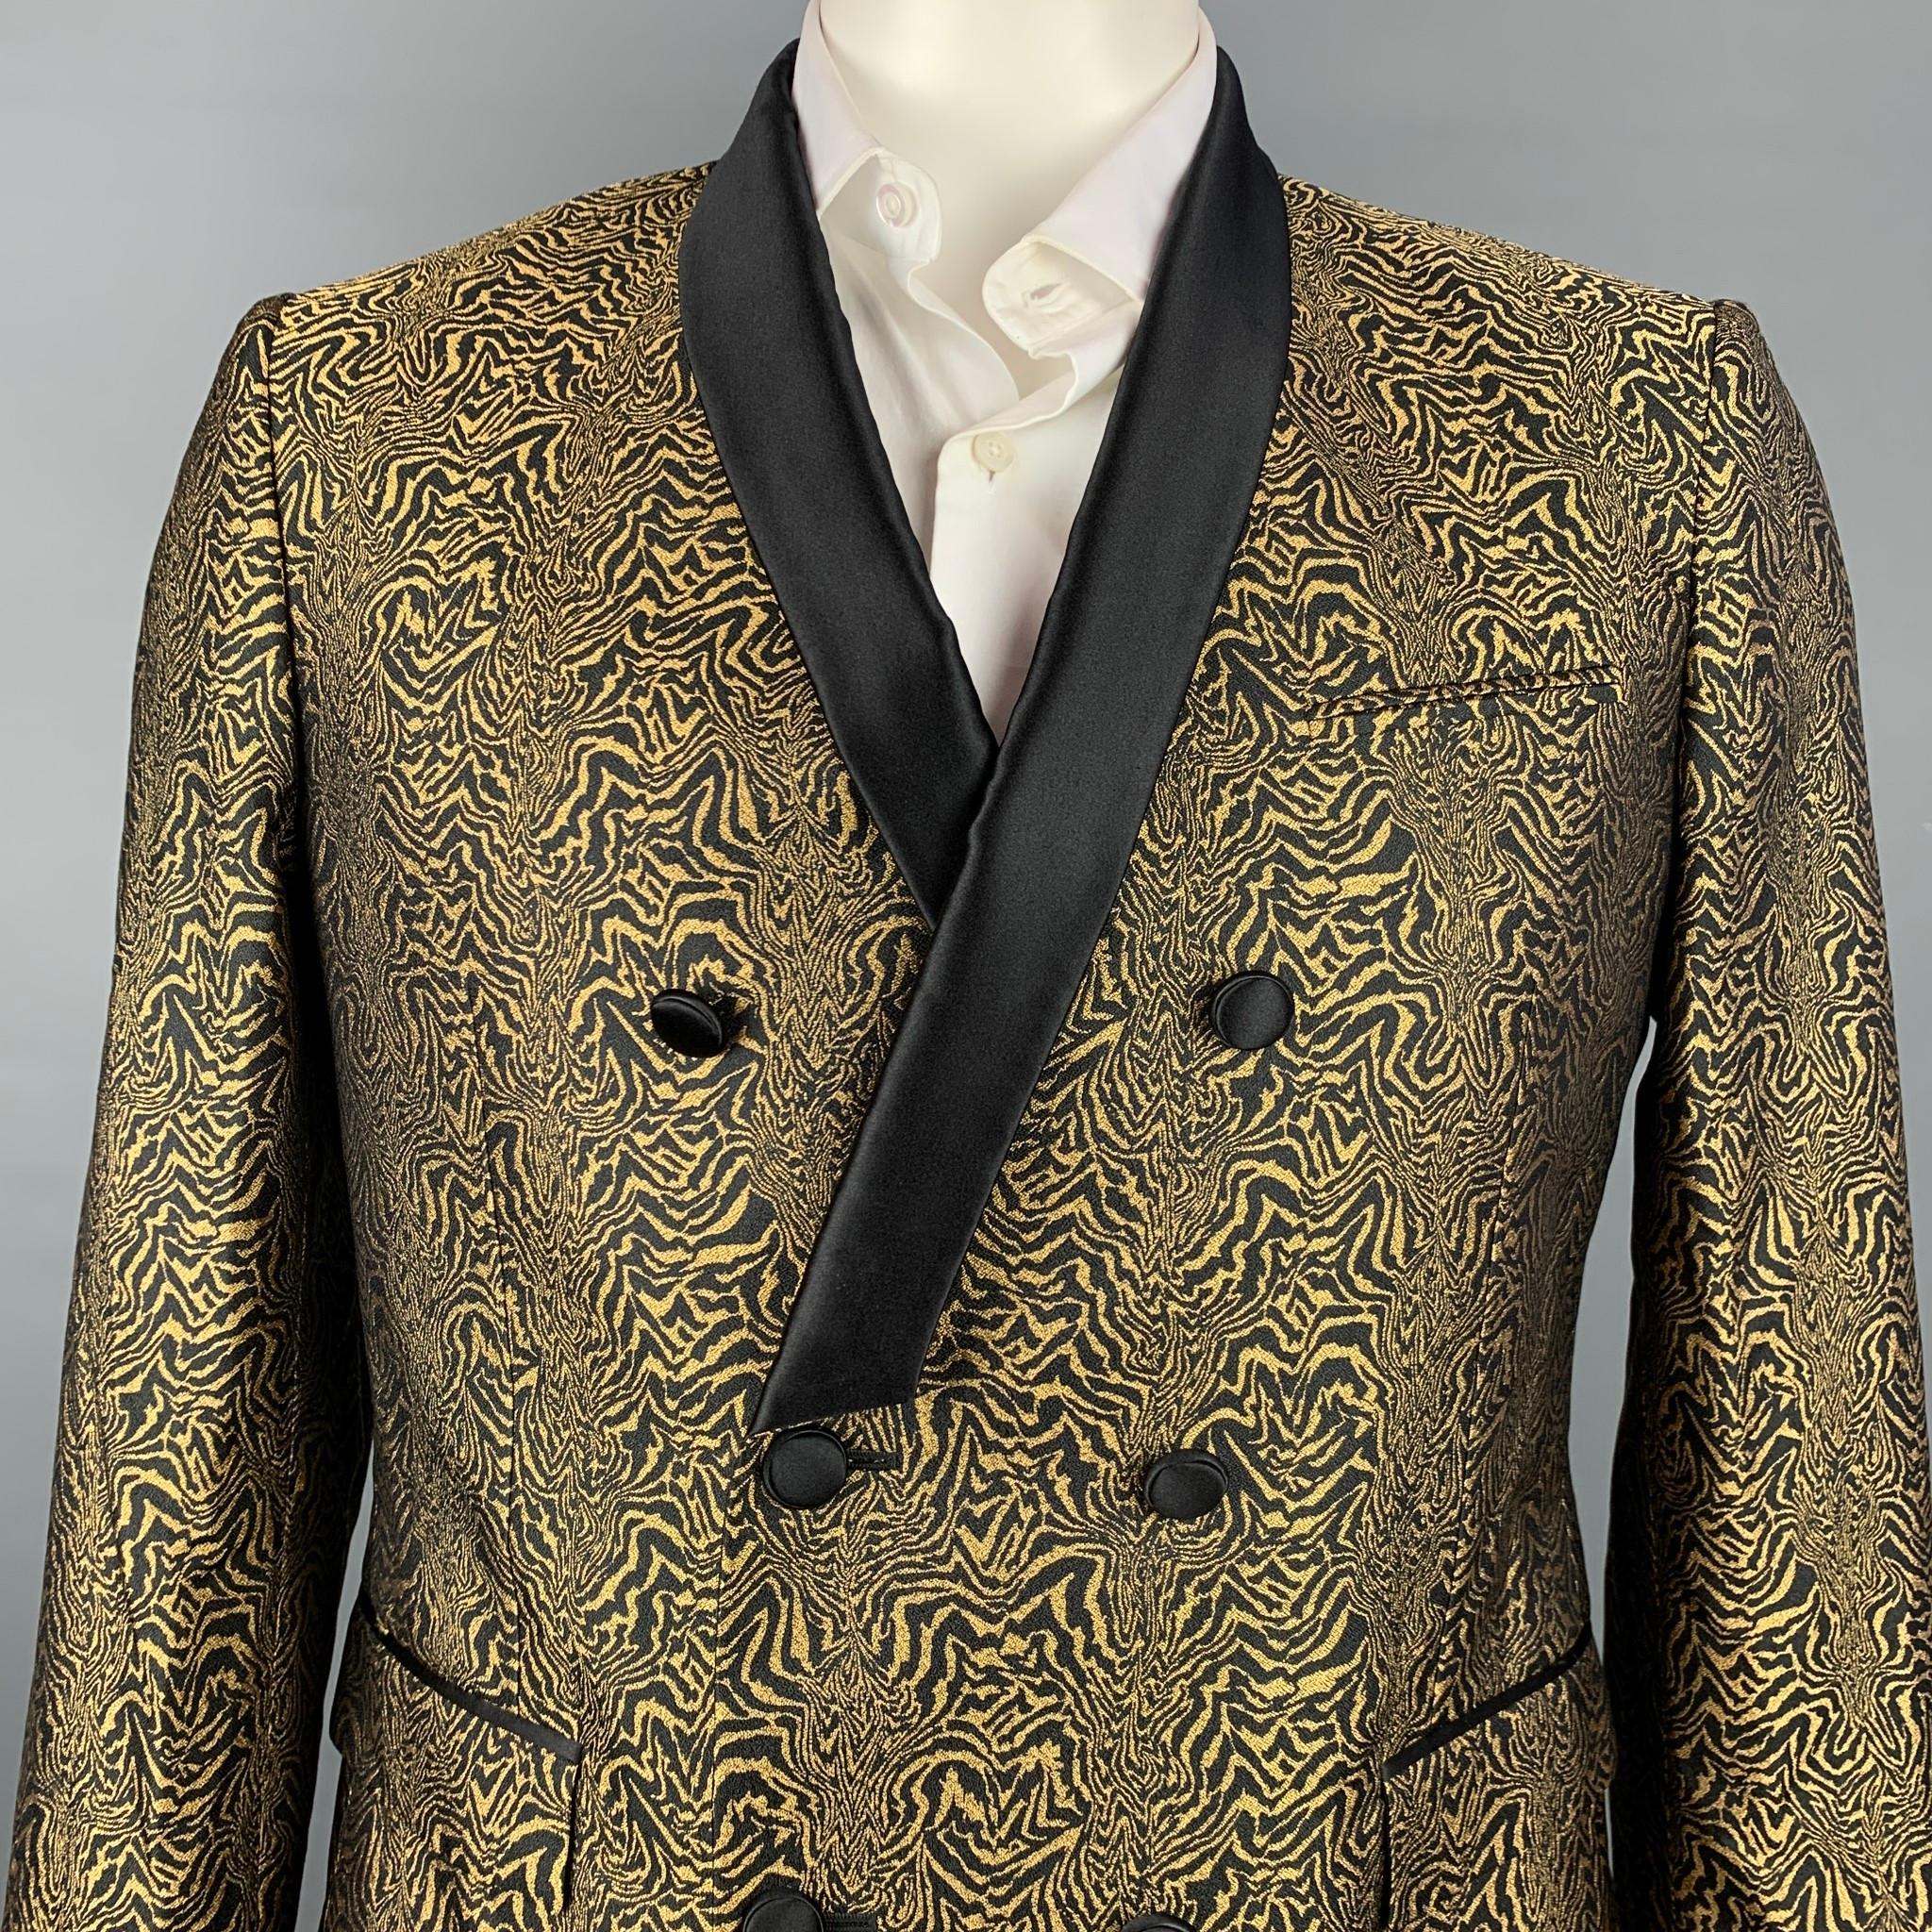 ROBERTO CAVALLI sport coat comes in a black & gold jacquard silk with a full liner featuring a shawl collar, flap pockets, and a double breasted closure. Made in Italy.

New With Tags.
Marked: IT 54

Measurements:

Shoulder: 18 in.
Chest: 42